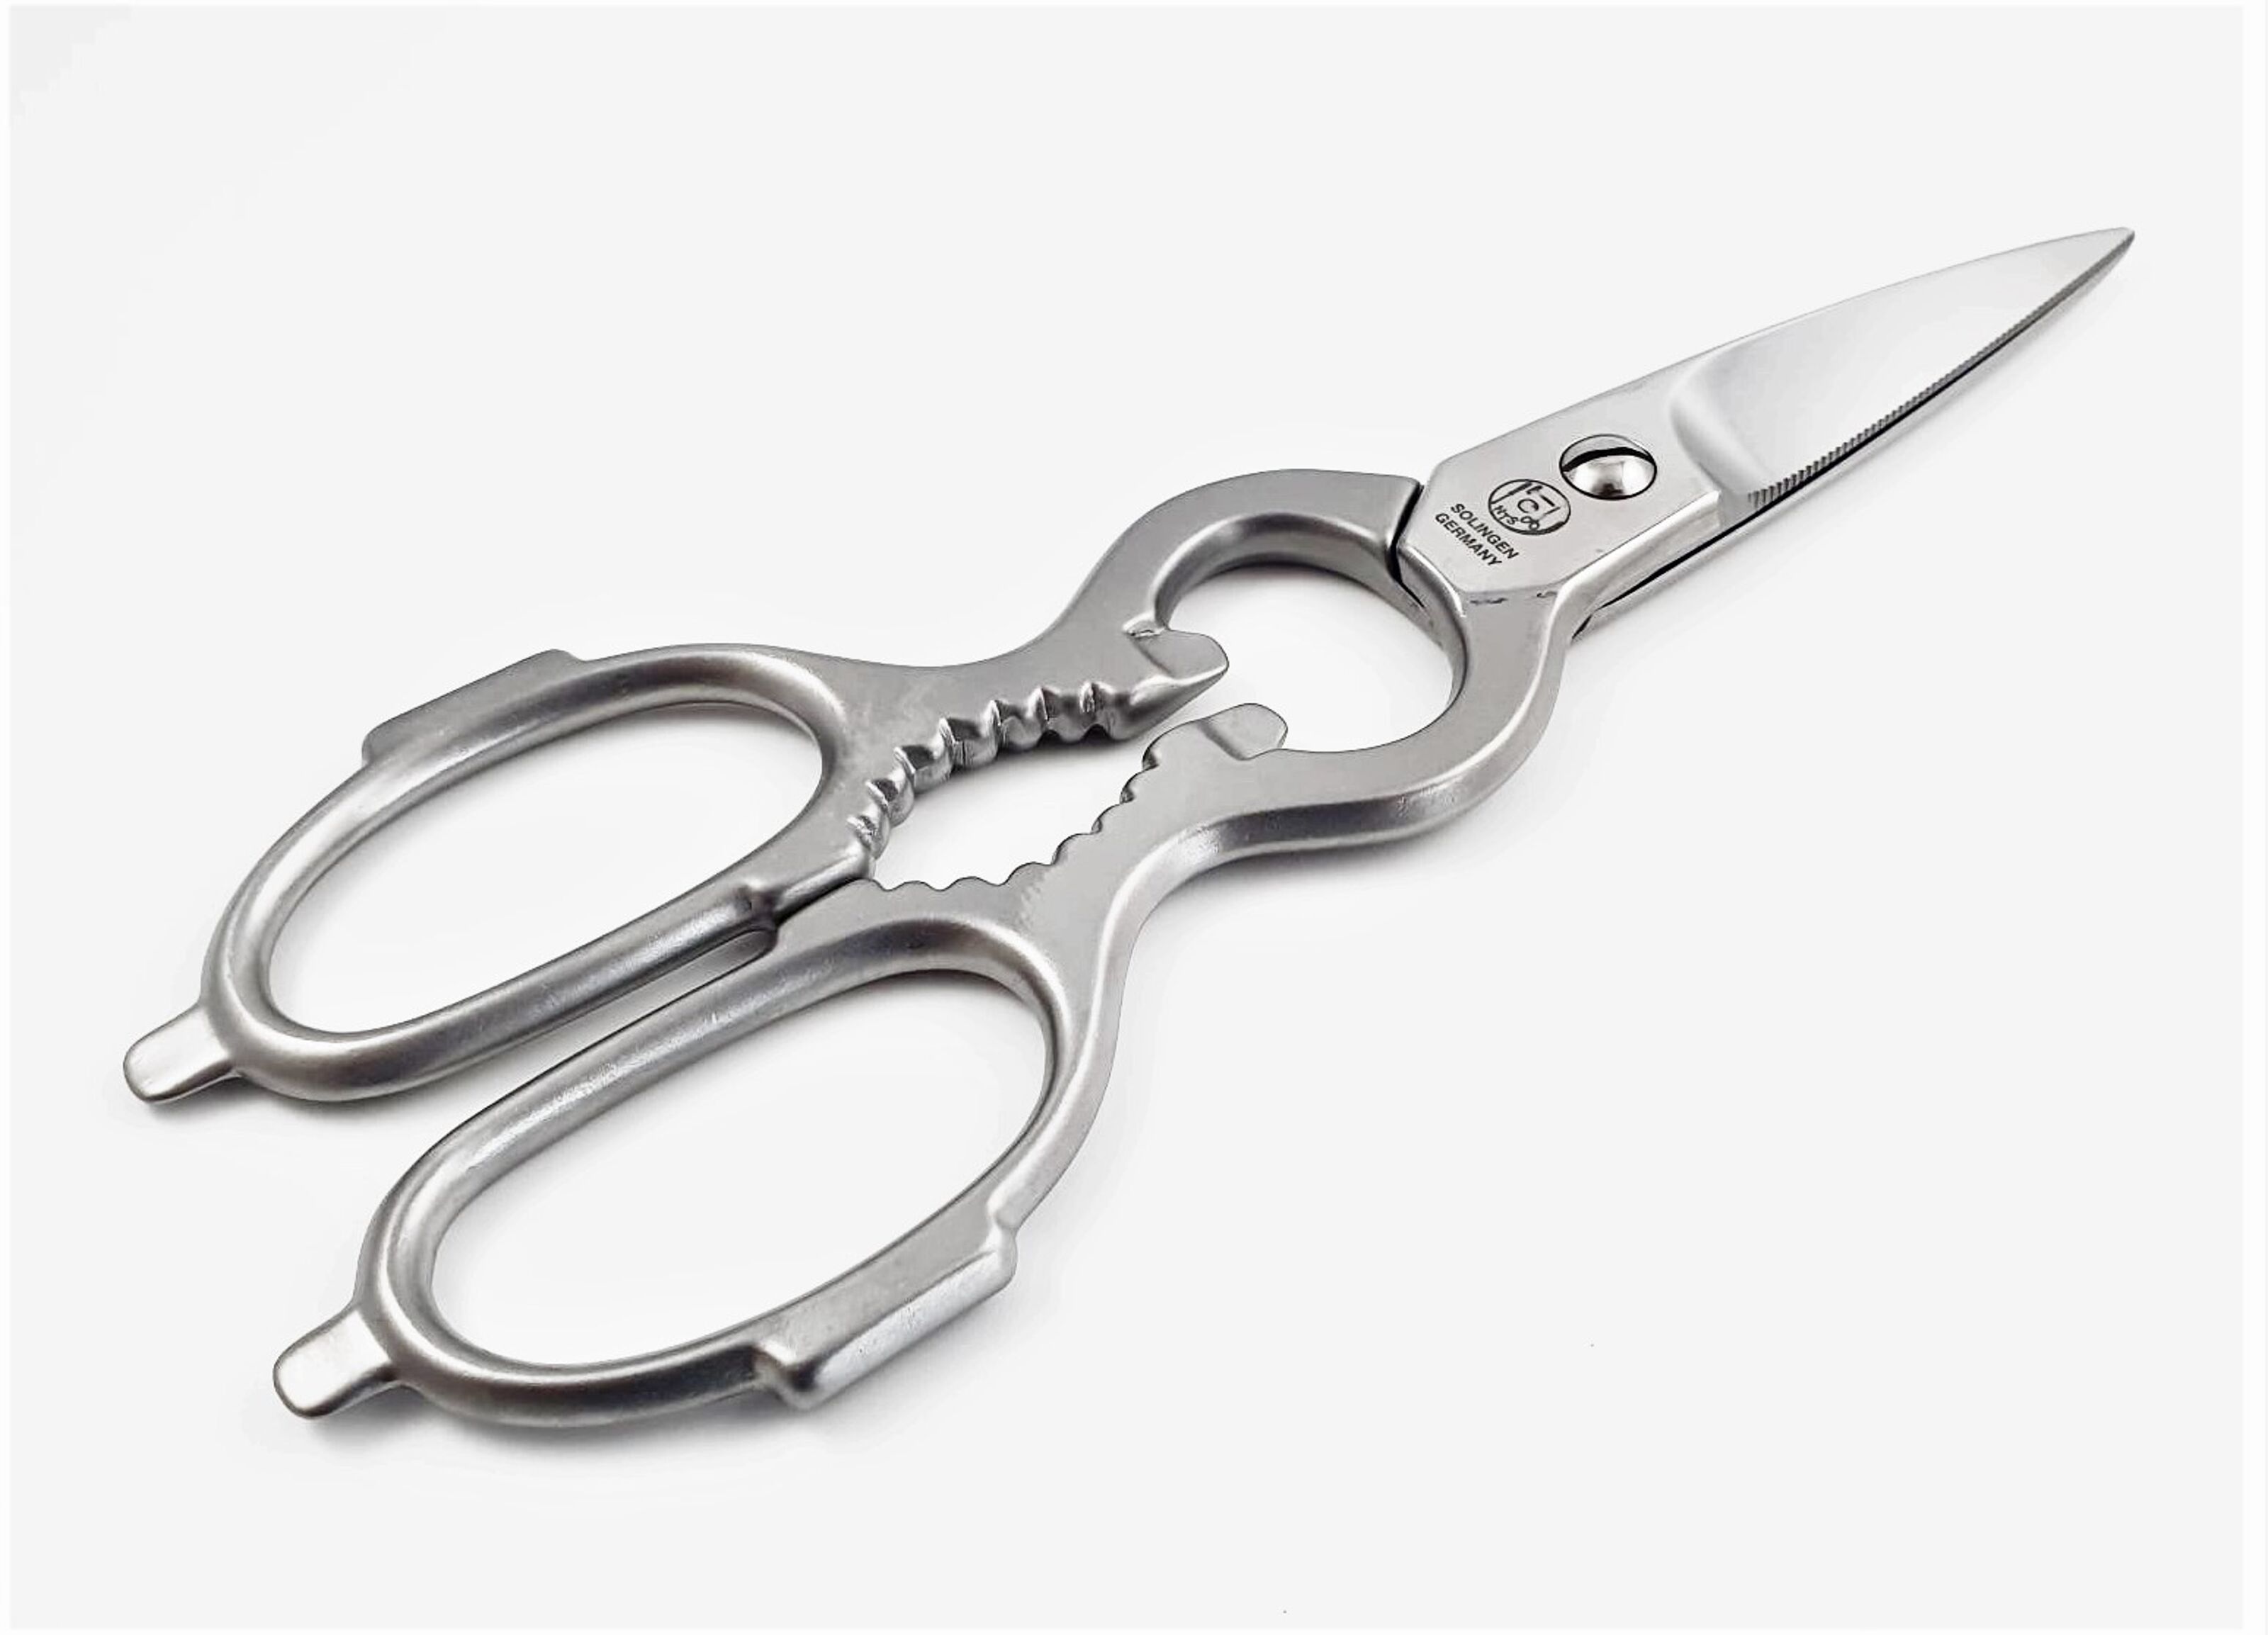 Wholesale food safe scissors for Precision and Safety in the Kitchen 